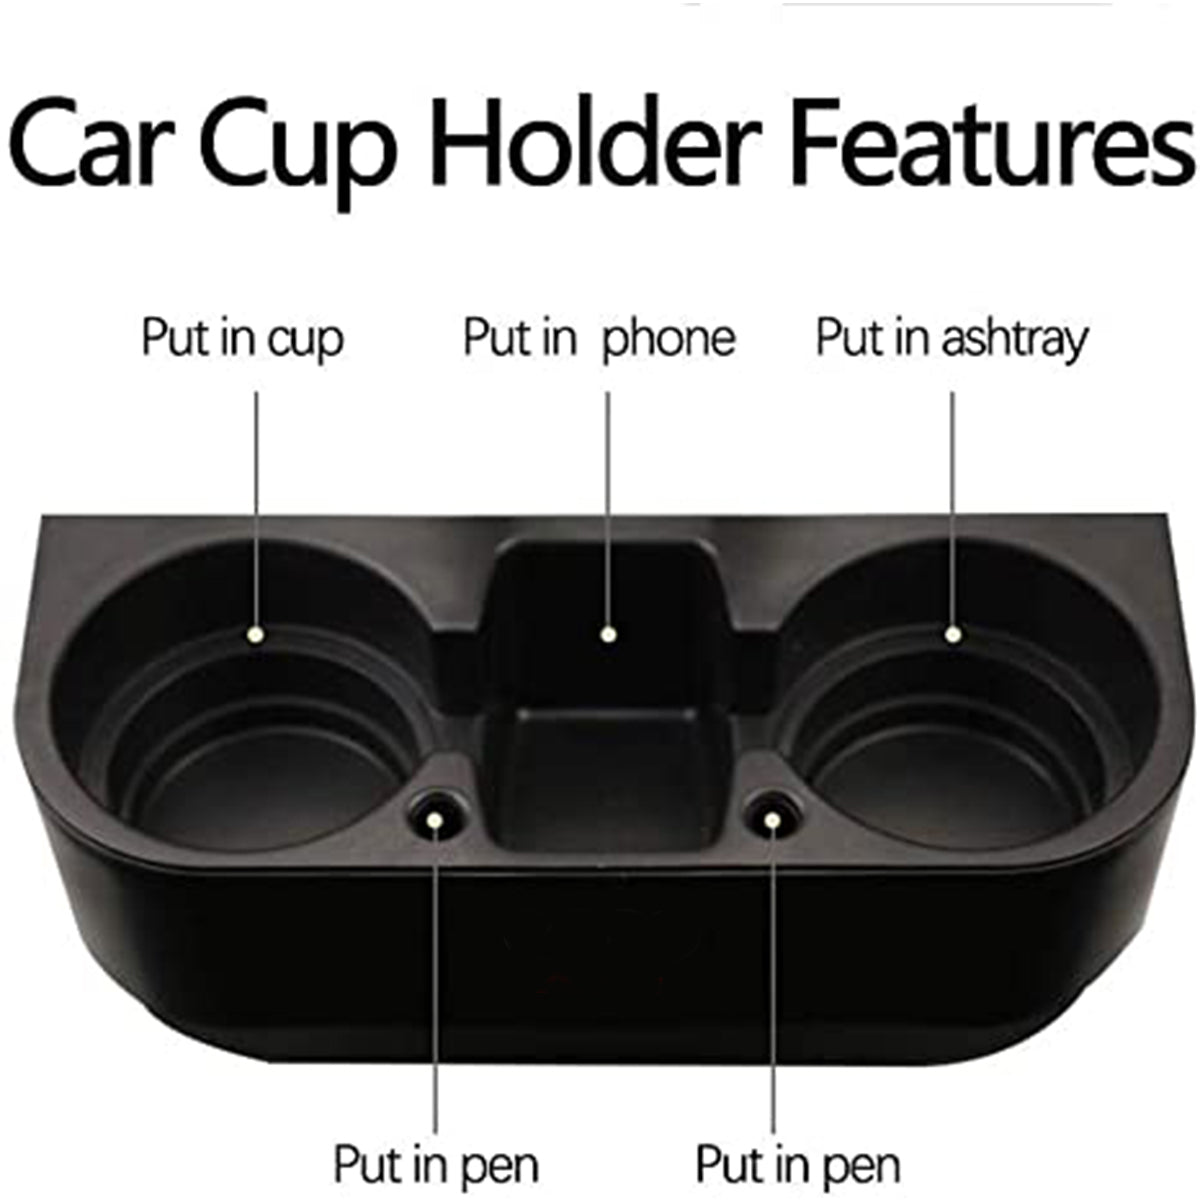 Delicate Leather Cup Holder Portable Multifunction Vehicle Seat Cup Cell Phone Drinks Holder Box Car Interior Organizer, Custom For Your Cars, Car Accessories CA11995 - Delicate Leather